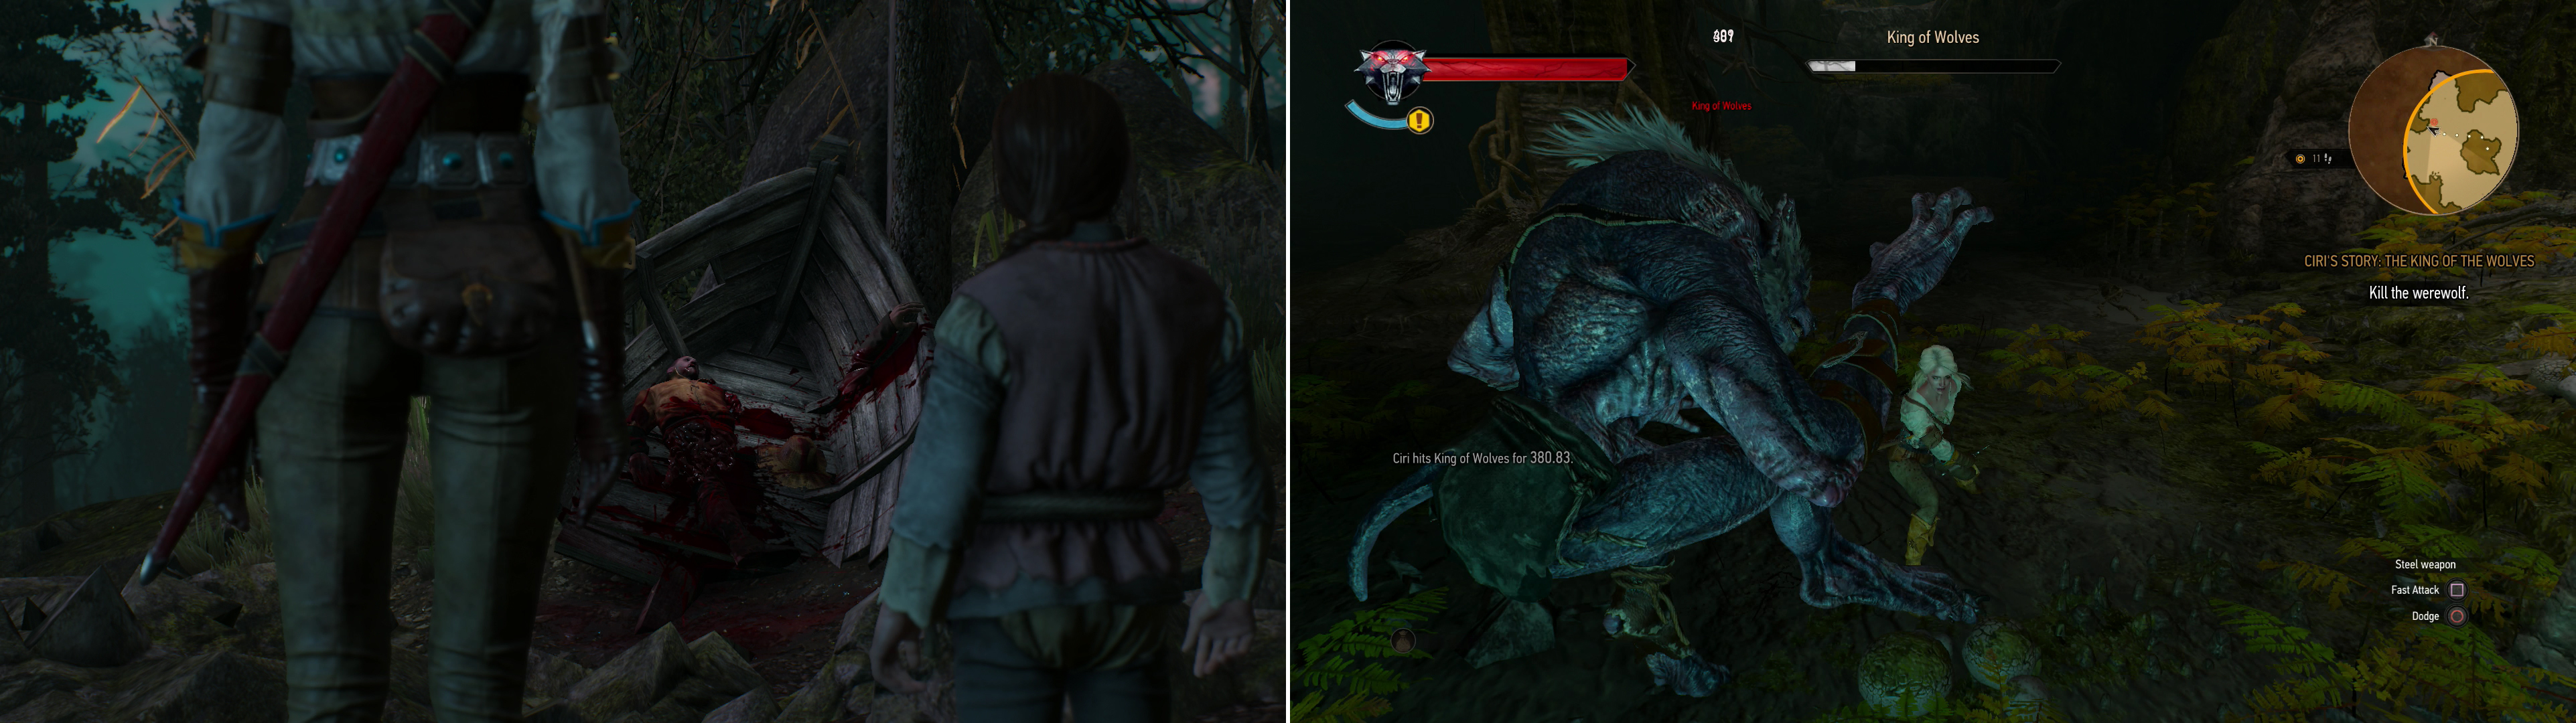 After discovering the gruesome remains of one of the King of Wolves's victims, Ciri decides she needs to prepare an oil to combat the beast (left). With such preparations, Ciri should have no trouble dethroning the King of Wolves (right).